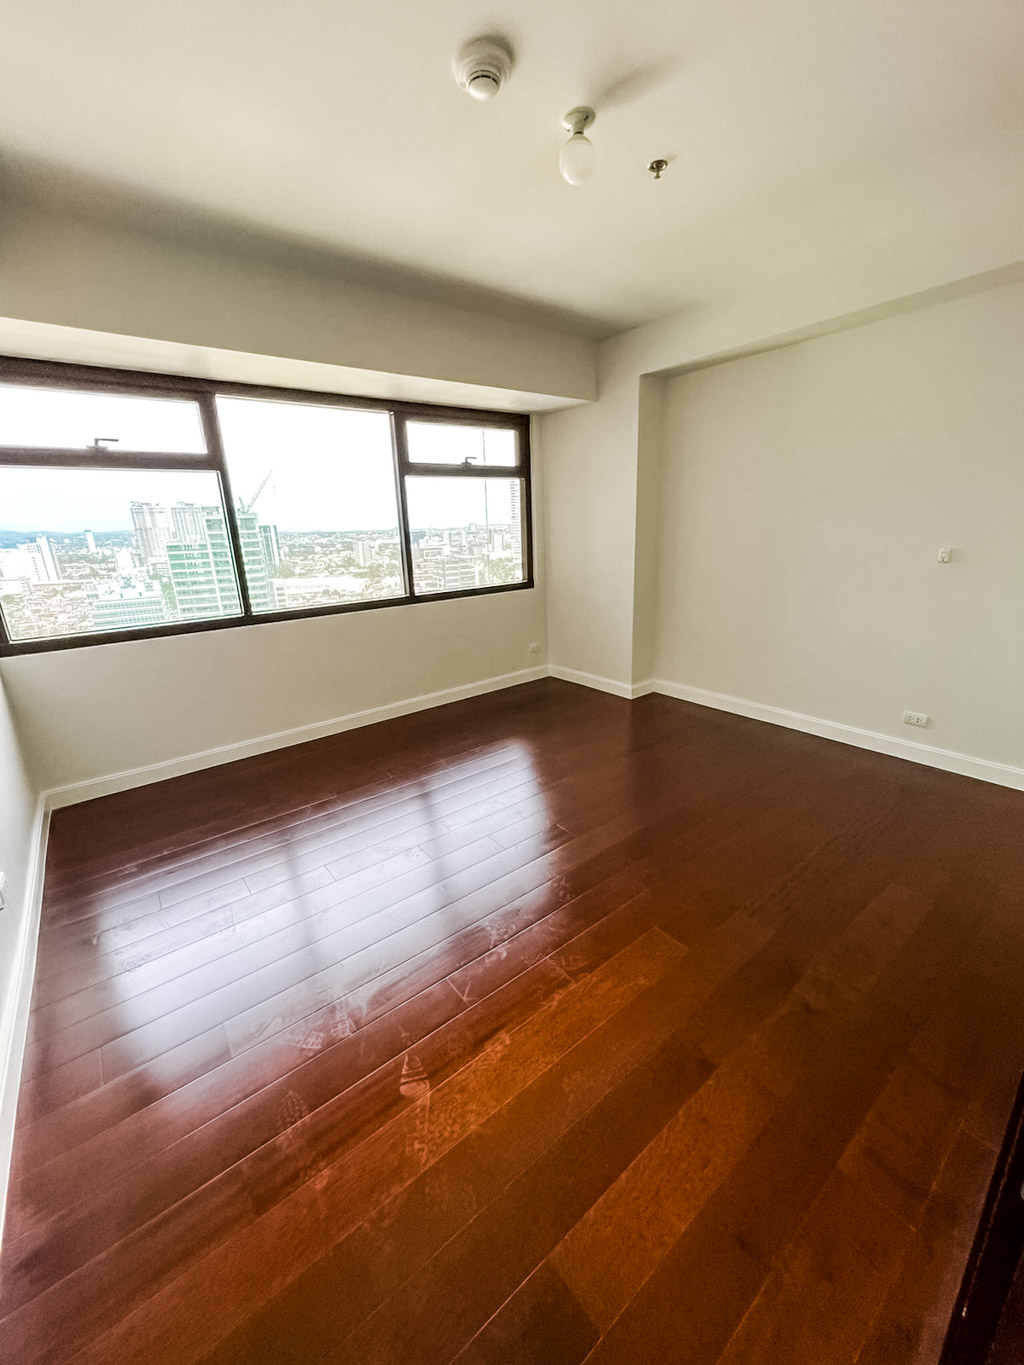 RCALC15 Unfurnished 1 Bedroom Condo for Rent in Cebu Business Park - 3